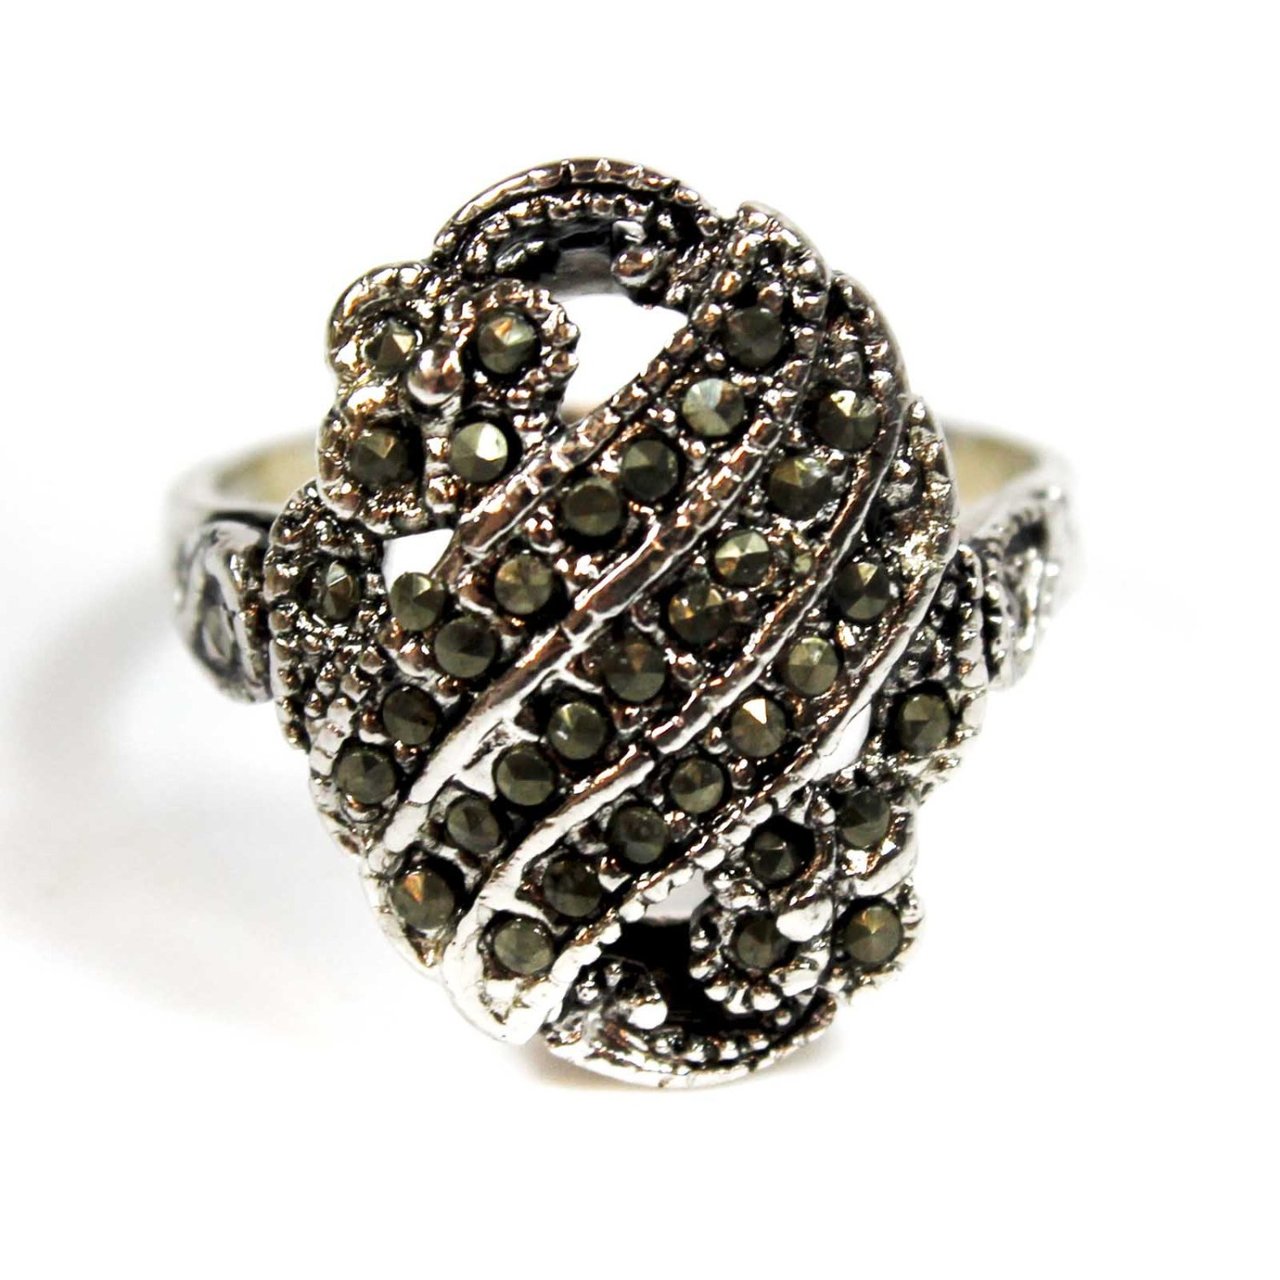 Vintage Unique Genuine Marcasite Ring 18k White Gold Made in USA Size: 10